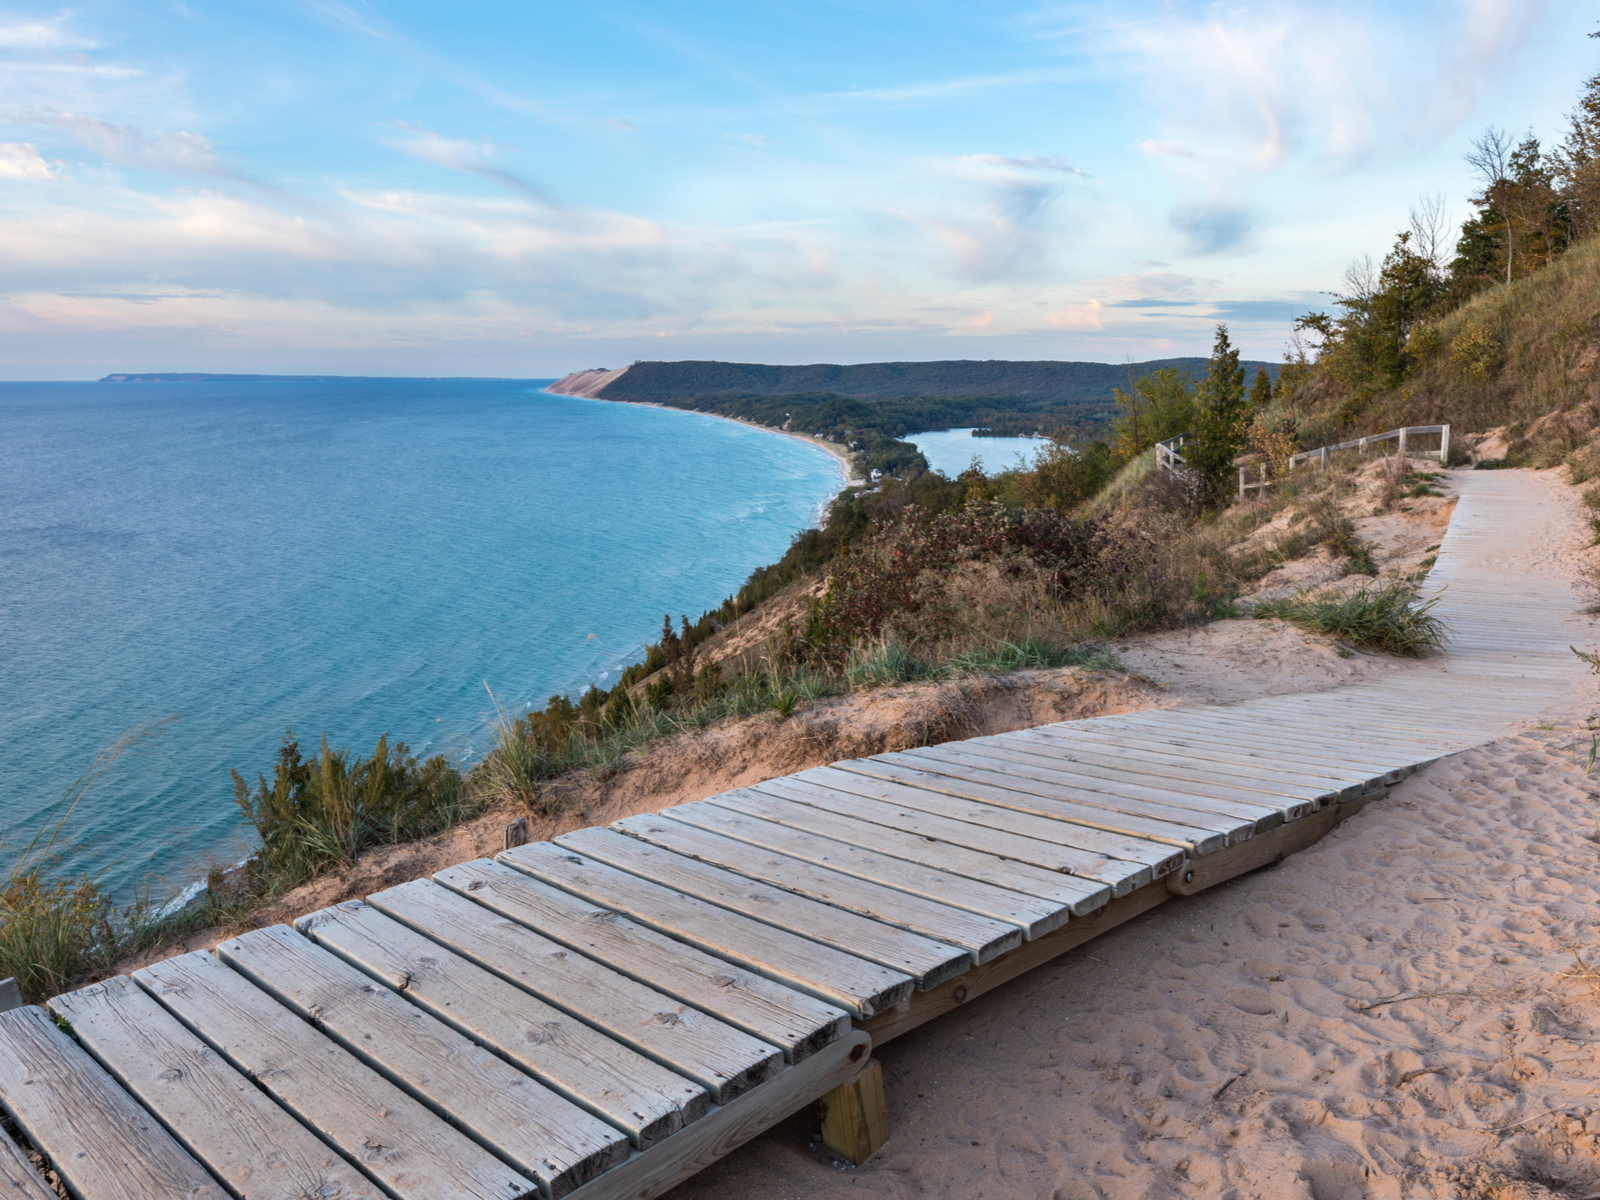 Summer photo of one of the best places to visit in Michigan, Sleeping Bear Dunes National Lakeshore